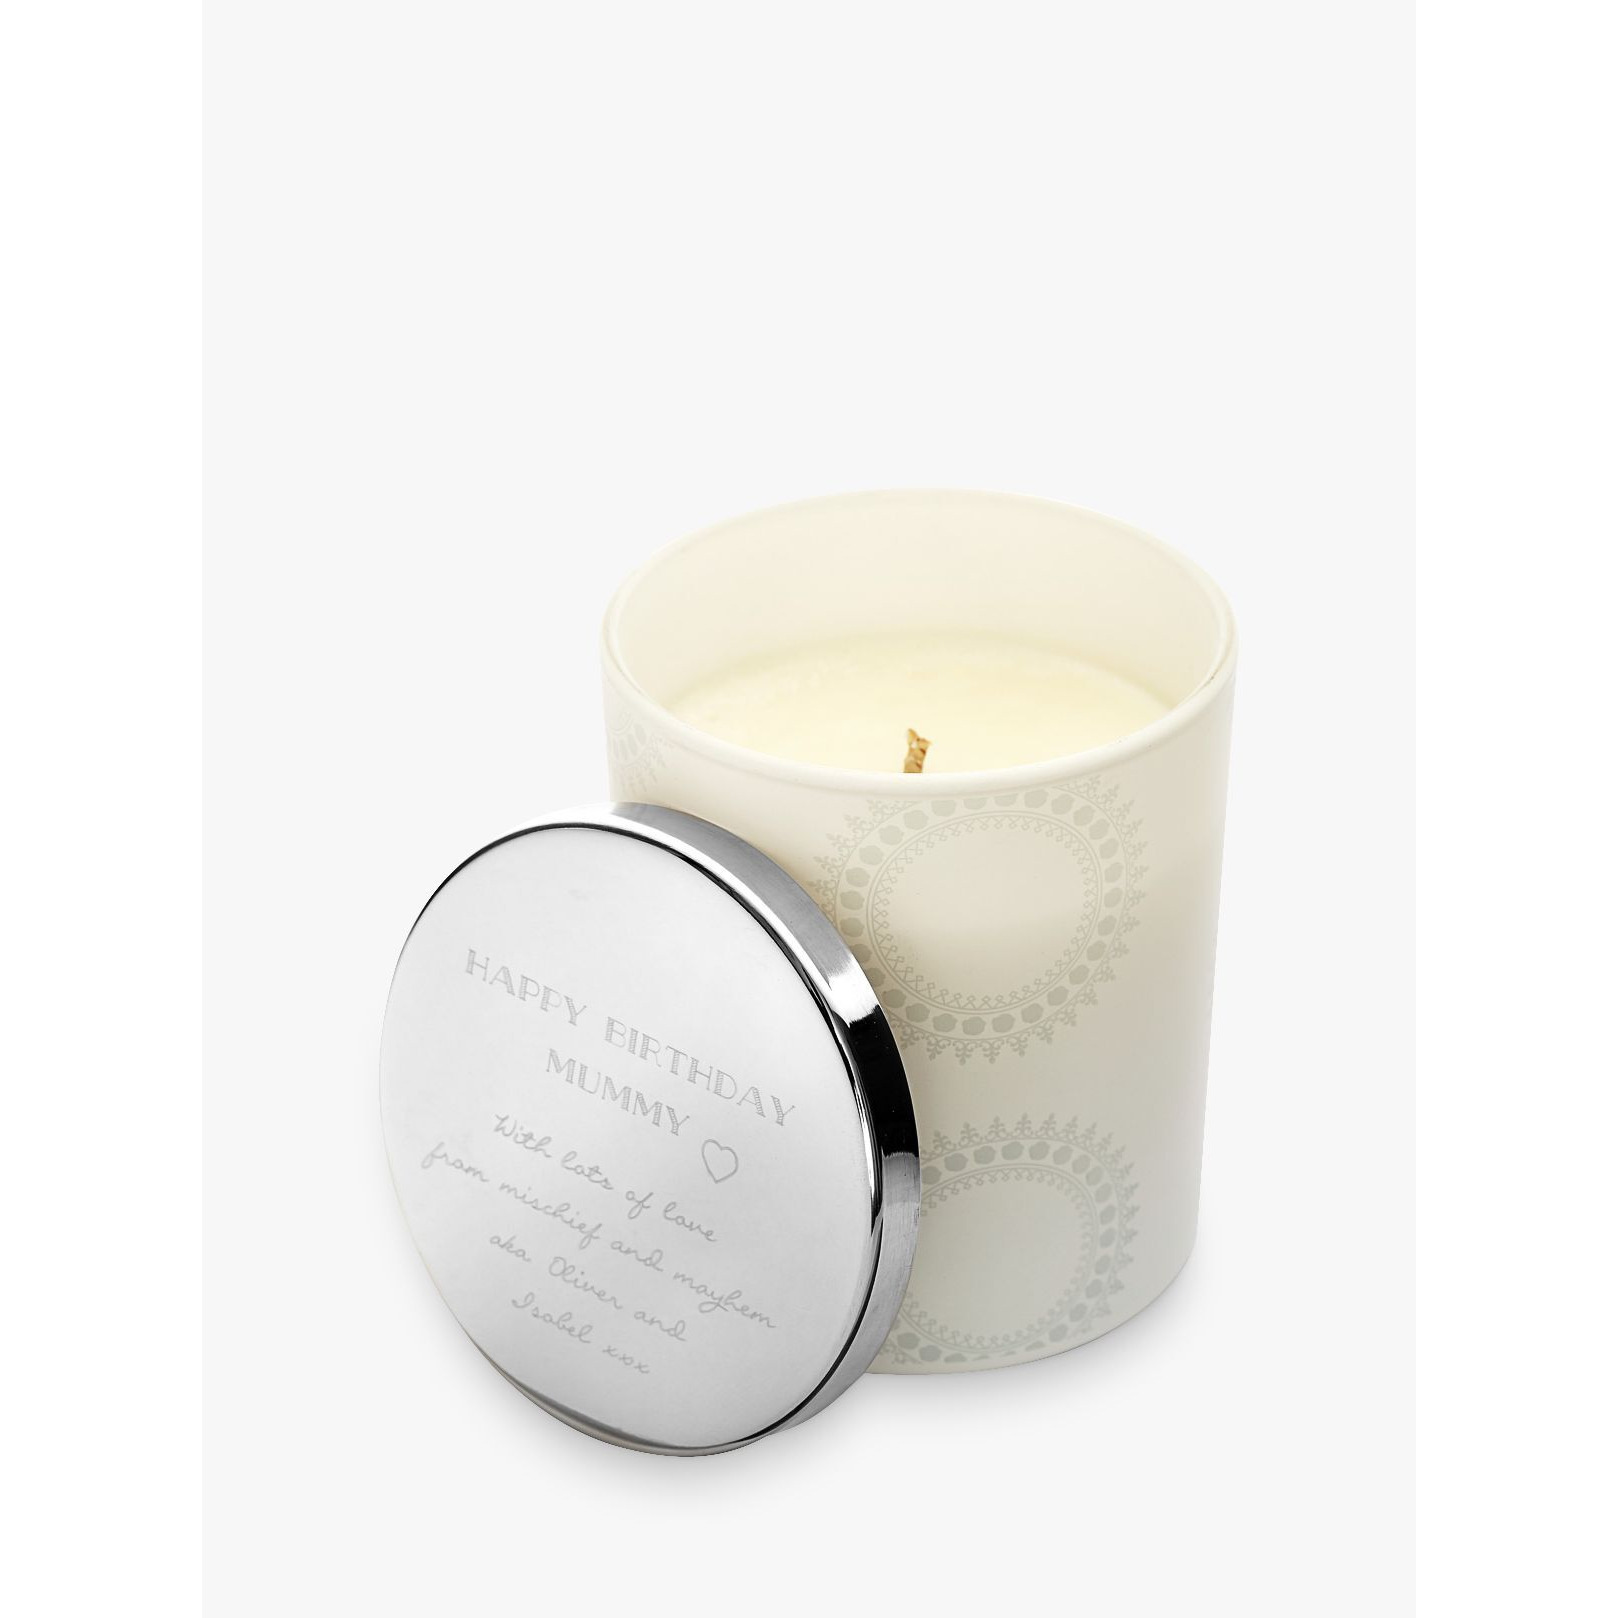 Under the Rose Personalised Scented Candle With Engraved Lid - image 1